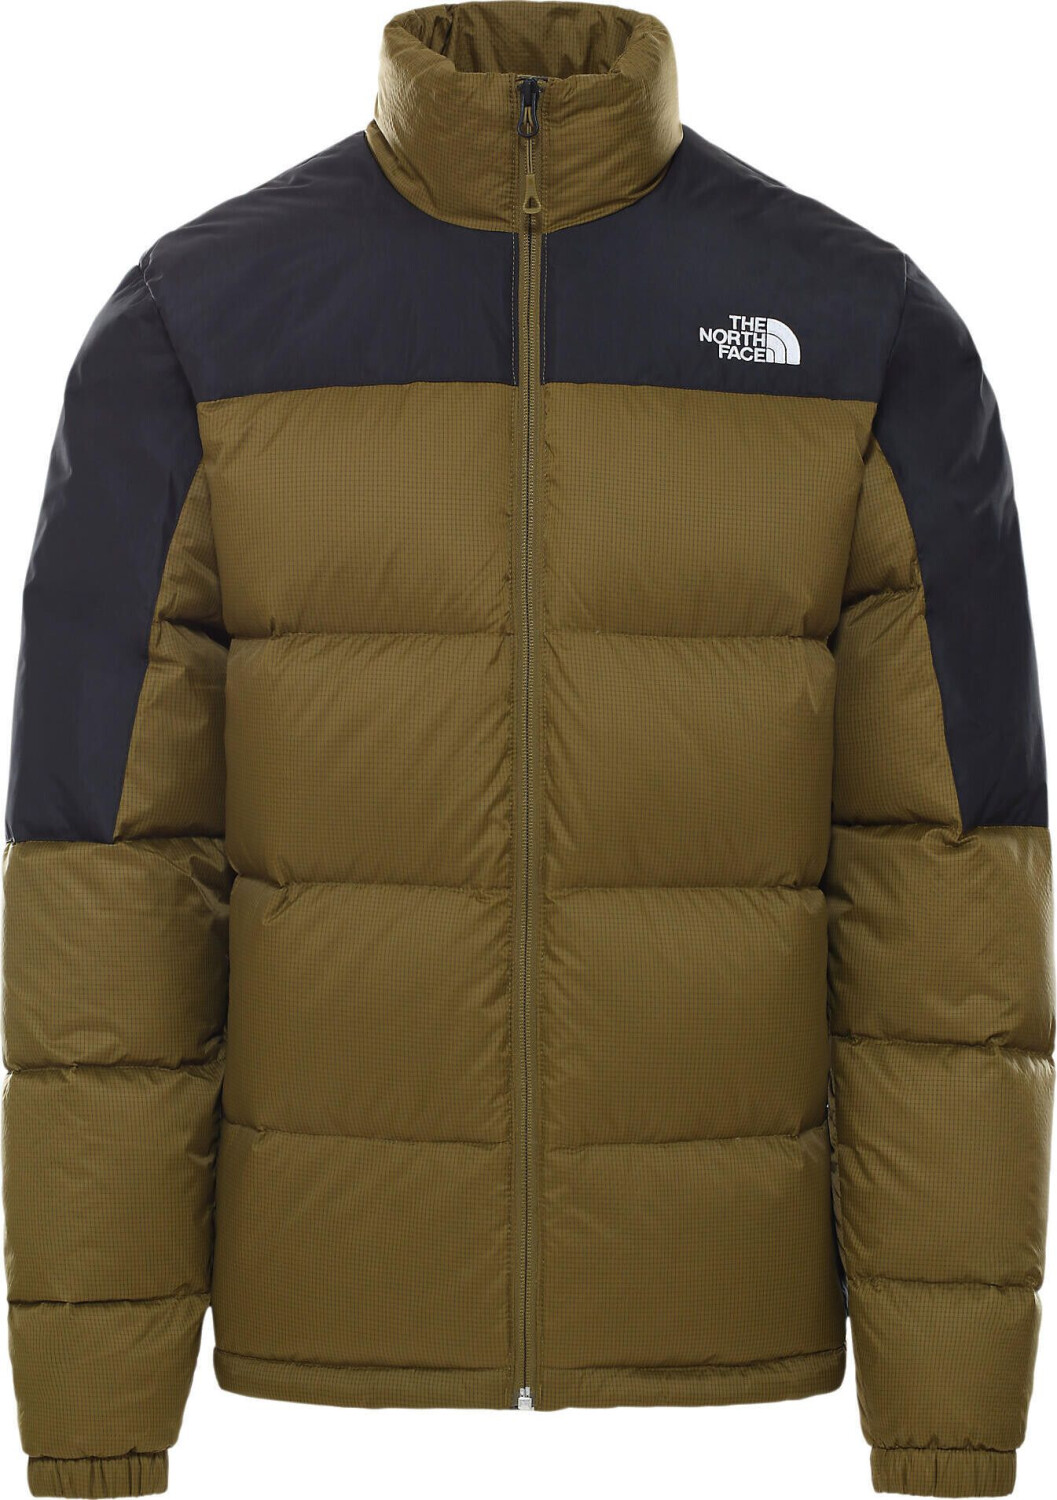 Buy The North Face Diablo Down Jacket (NF0A4M9J) from £140.50